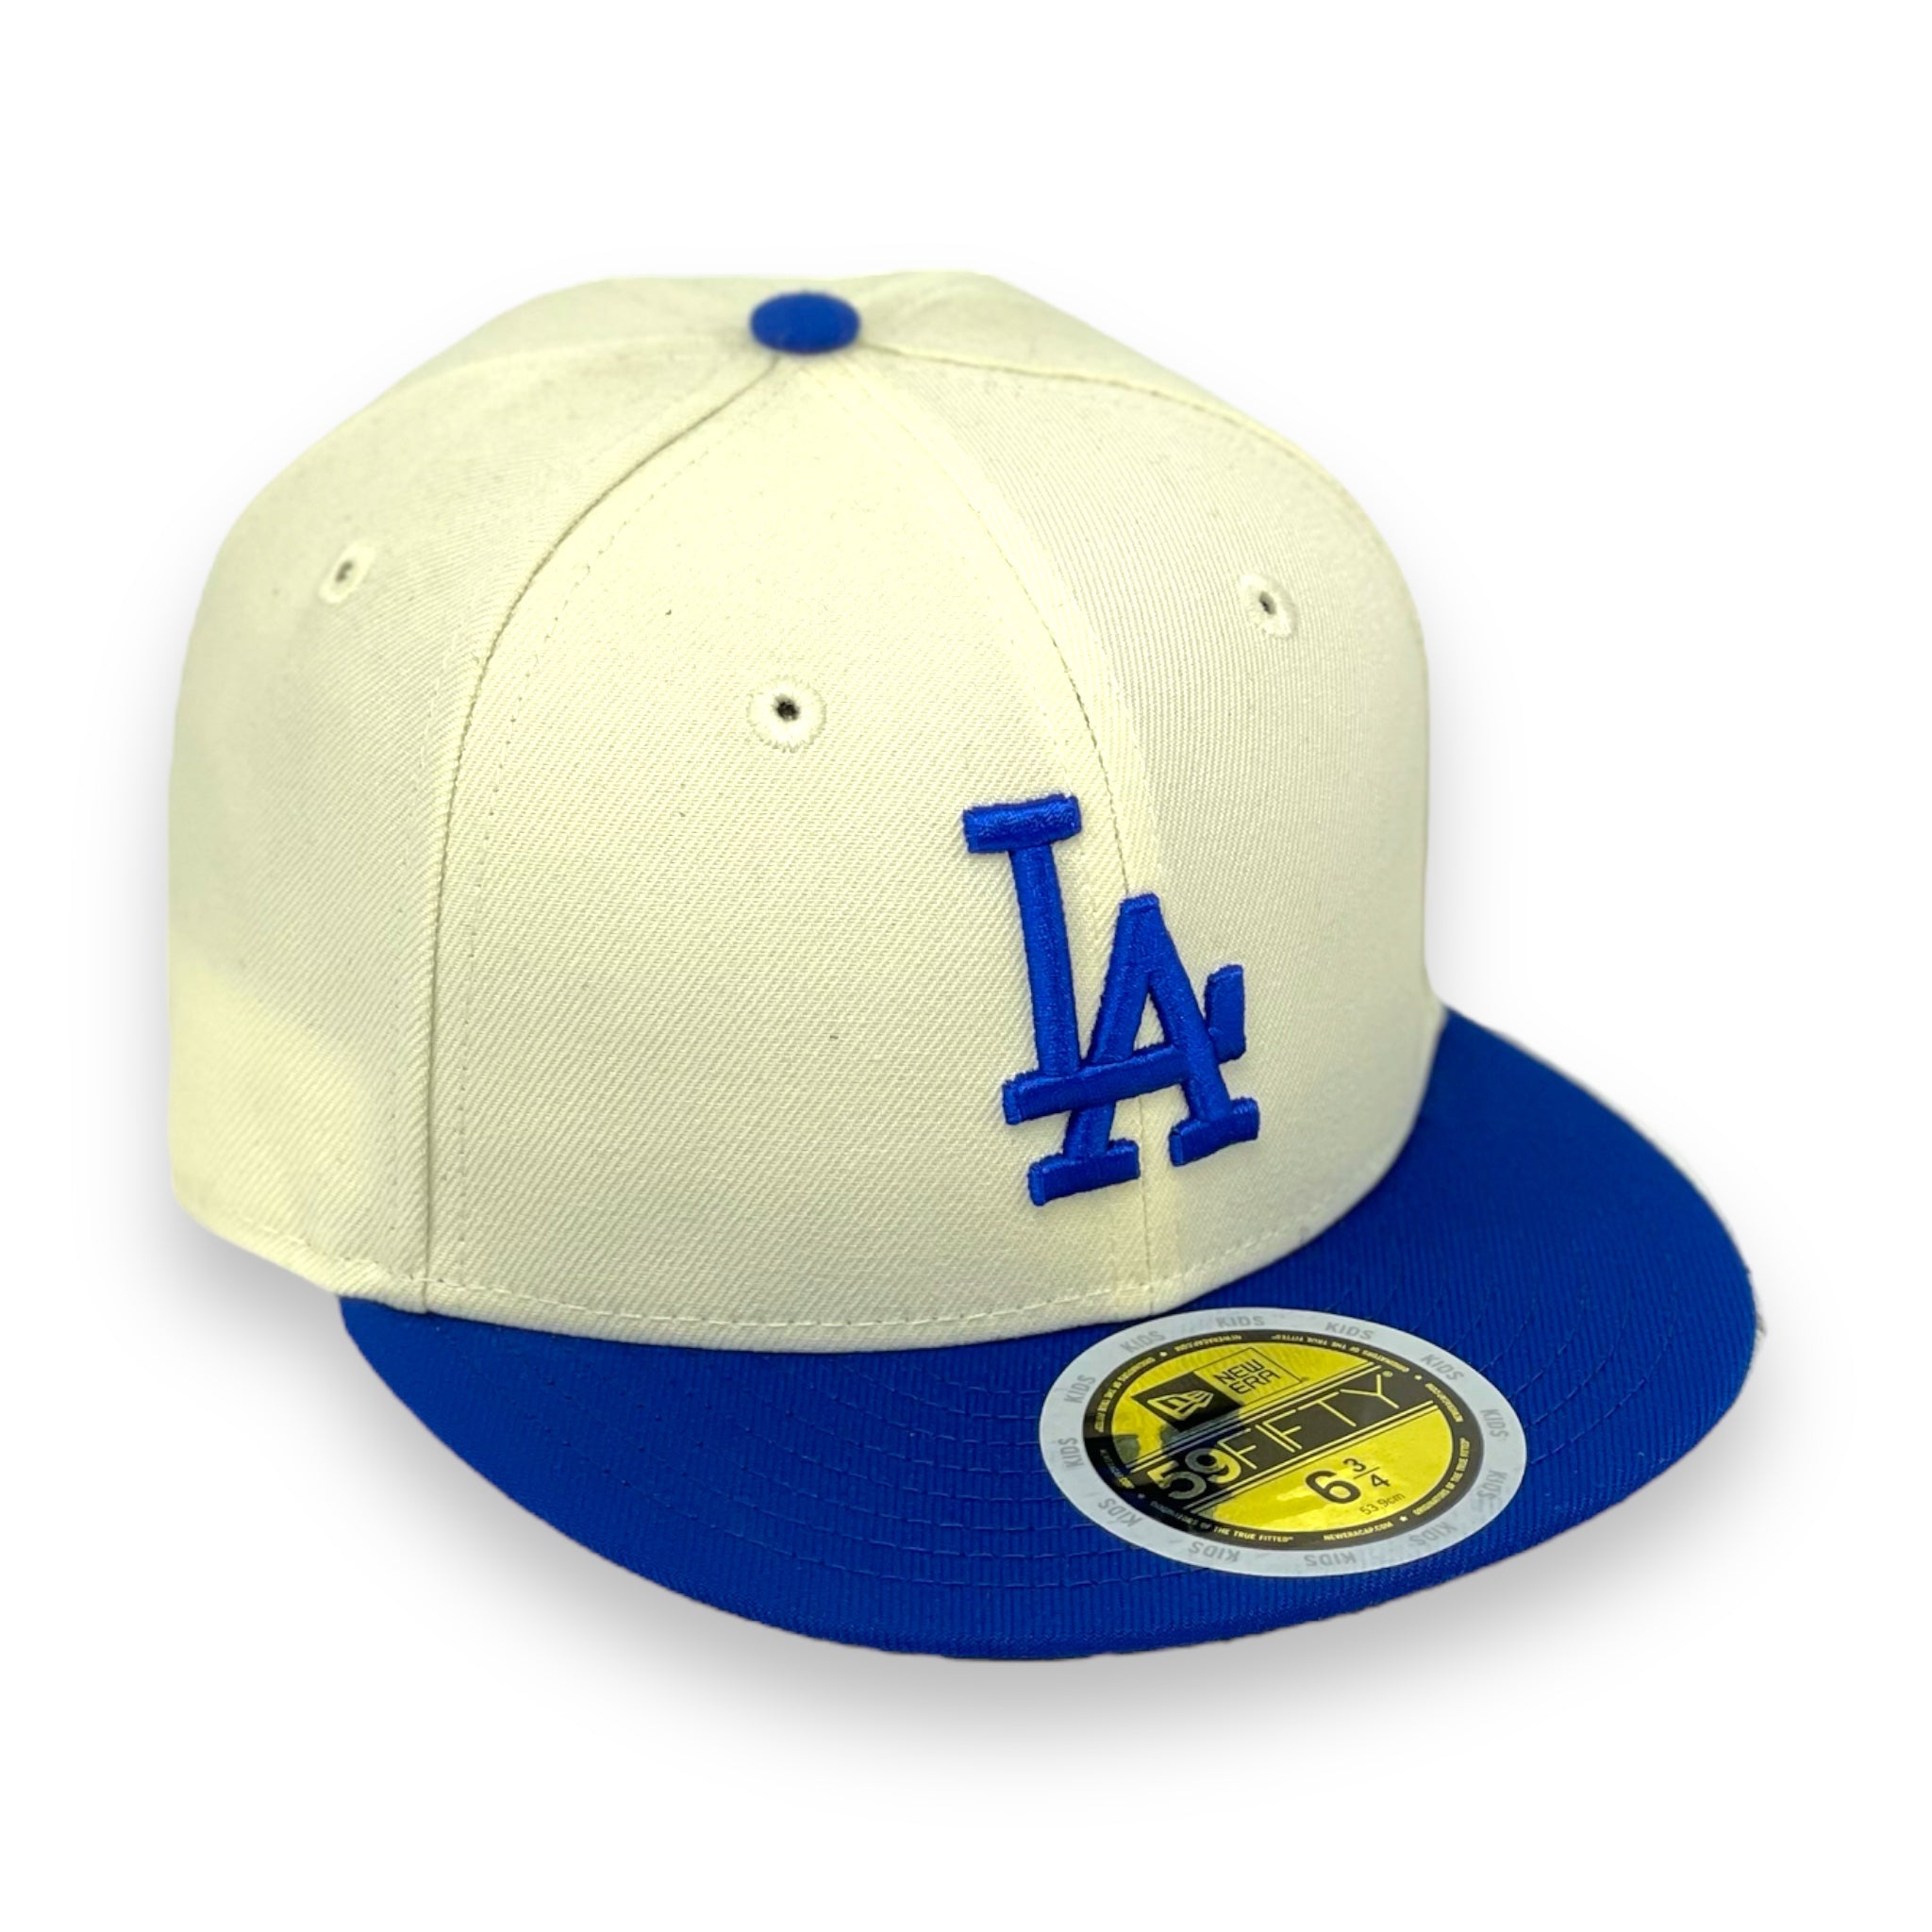 “KIDS” - LOS ANGELES DODGERS (OFF-WHITE) NEW ERA 59FIFTY FITTED